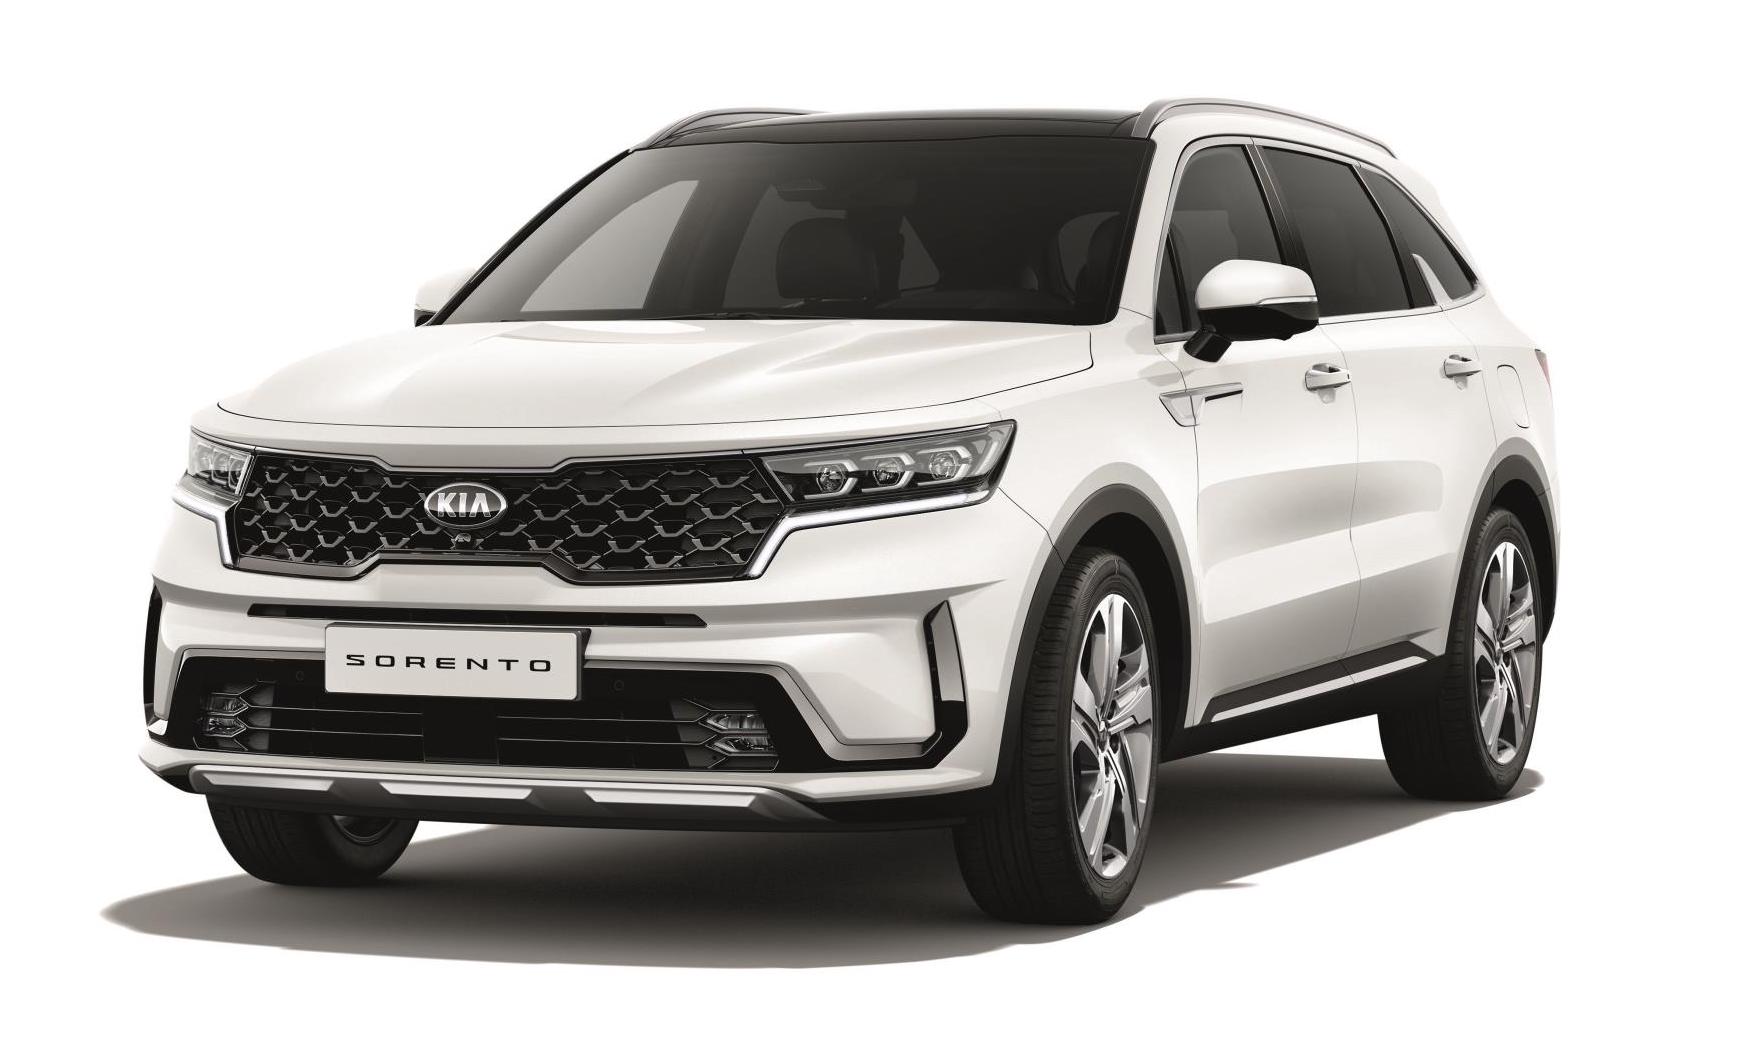 2021 Kia Sorento officially revealed, inside and out